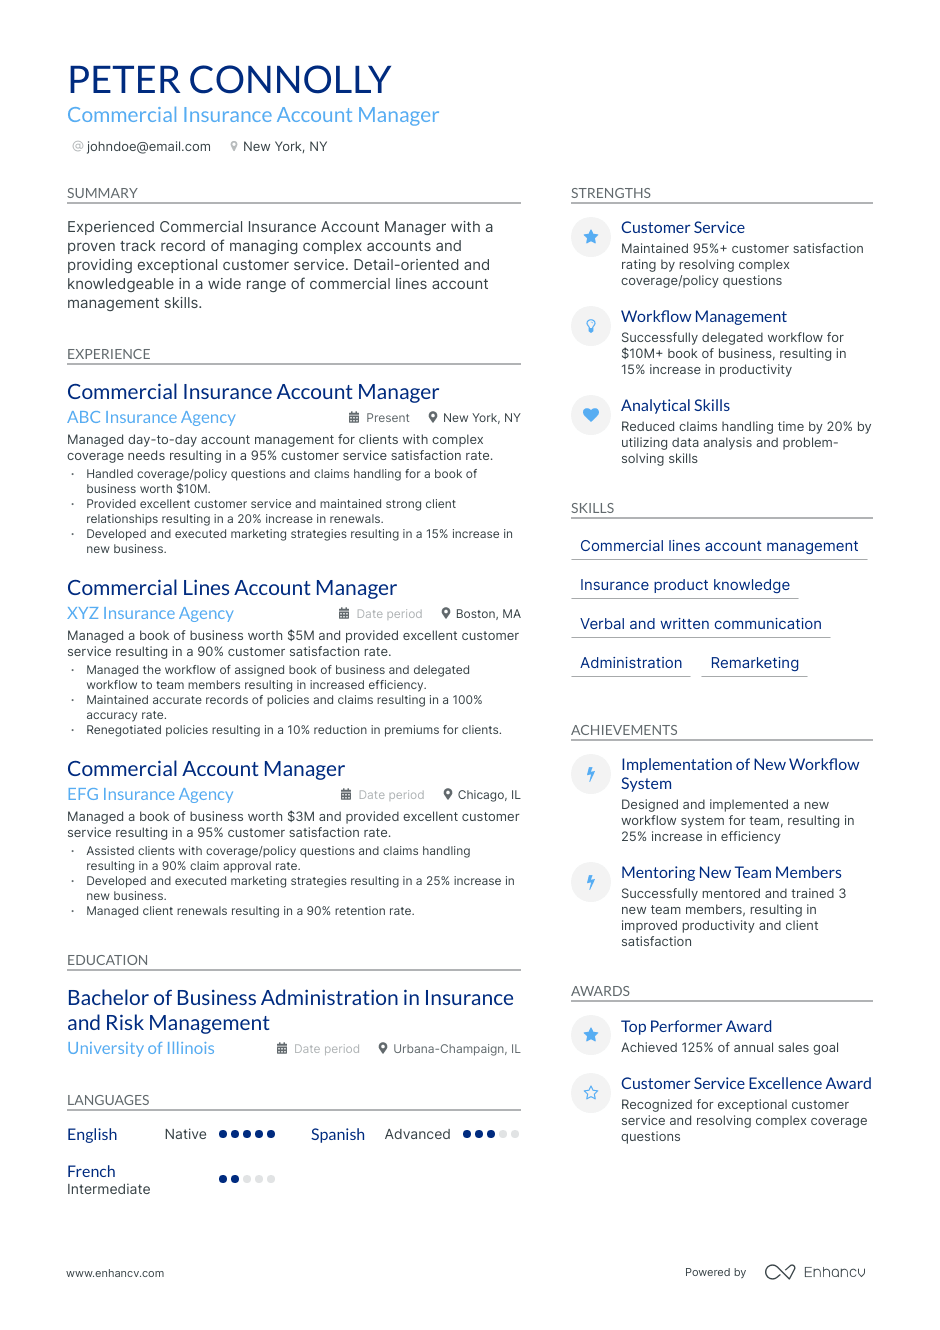 Commercial Account Manager resume example